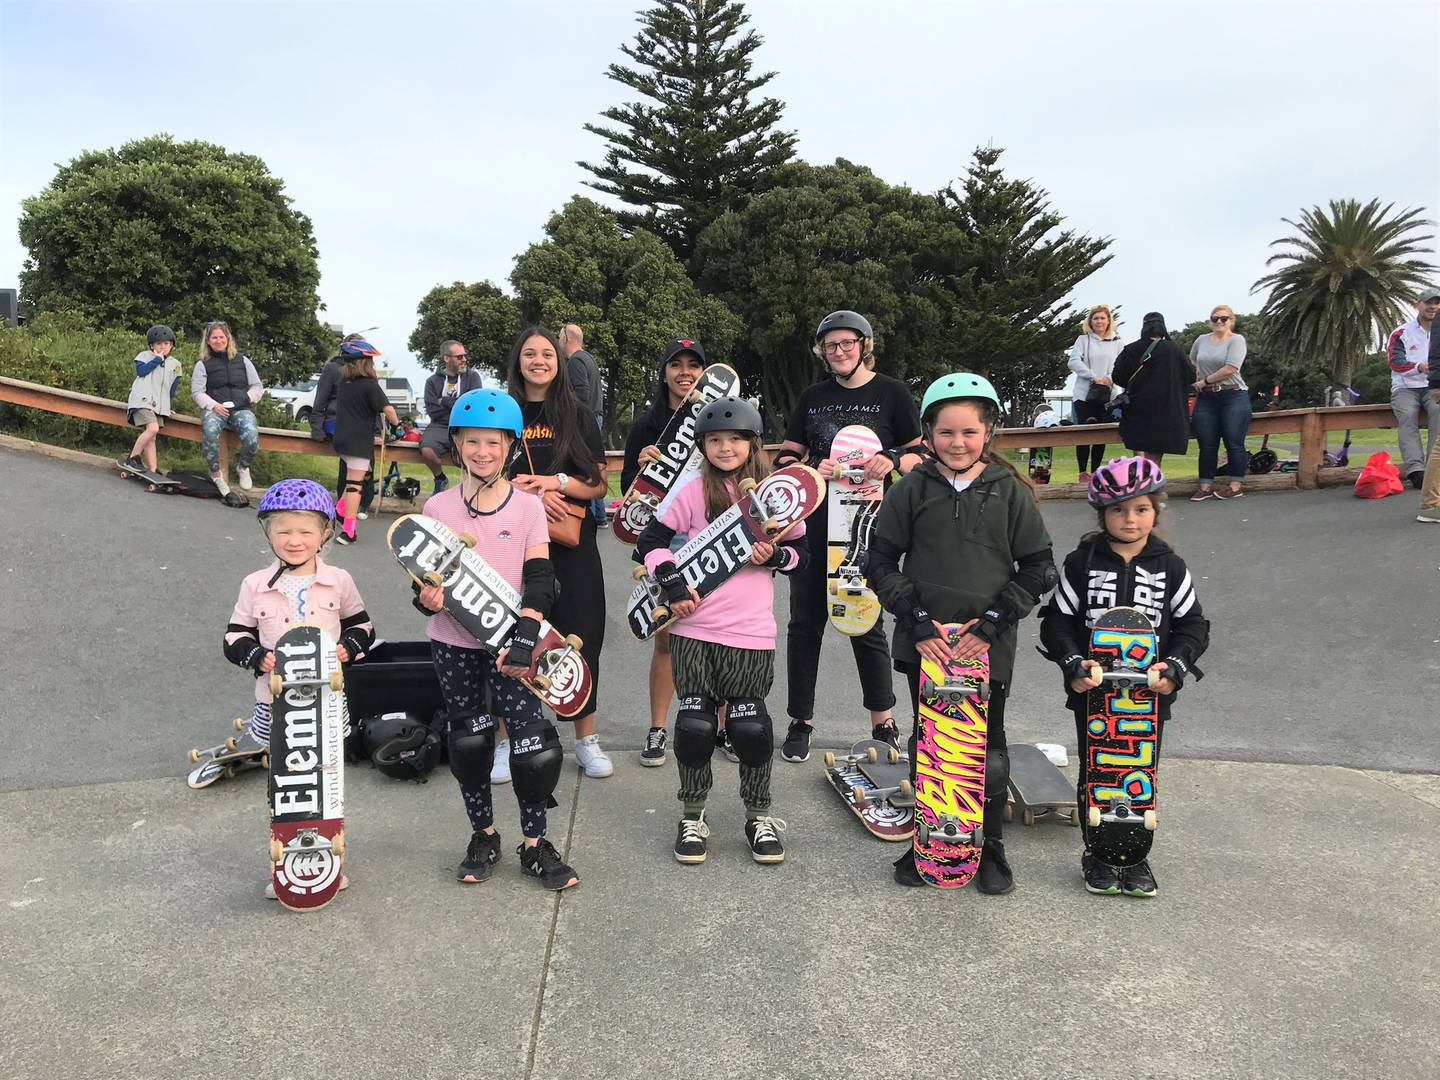 Free skateboarding sessions in Kāpiti are proving popular with young girls.